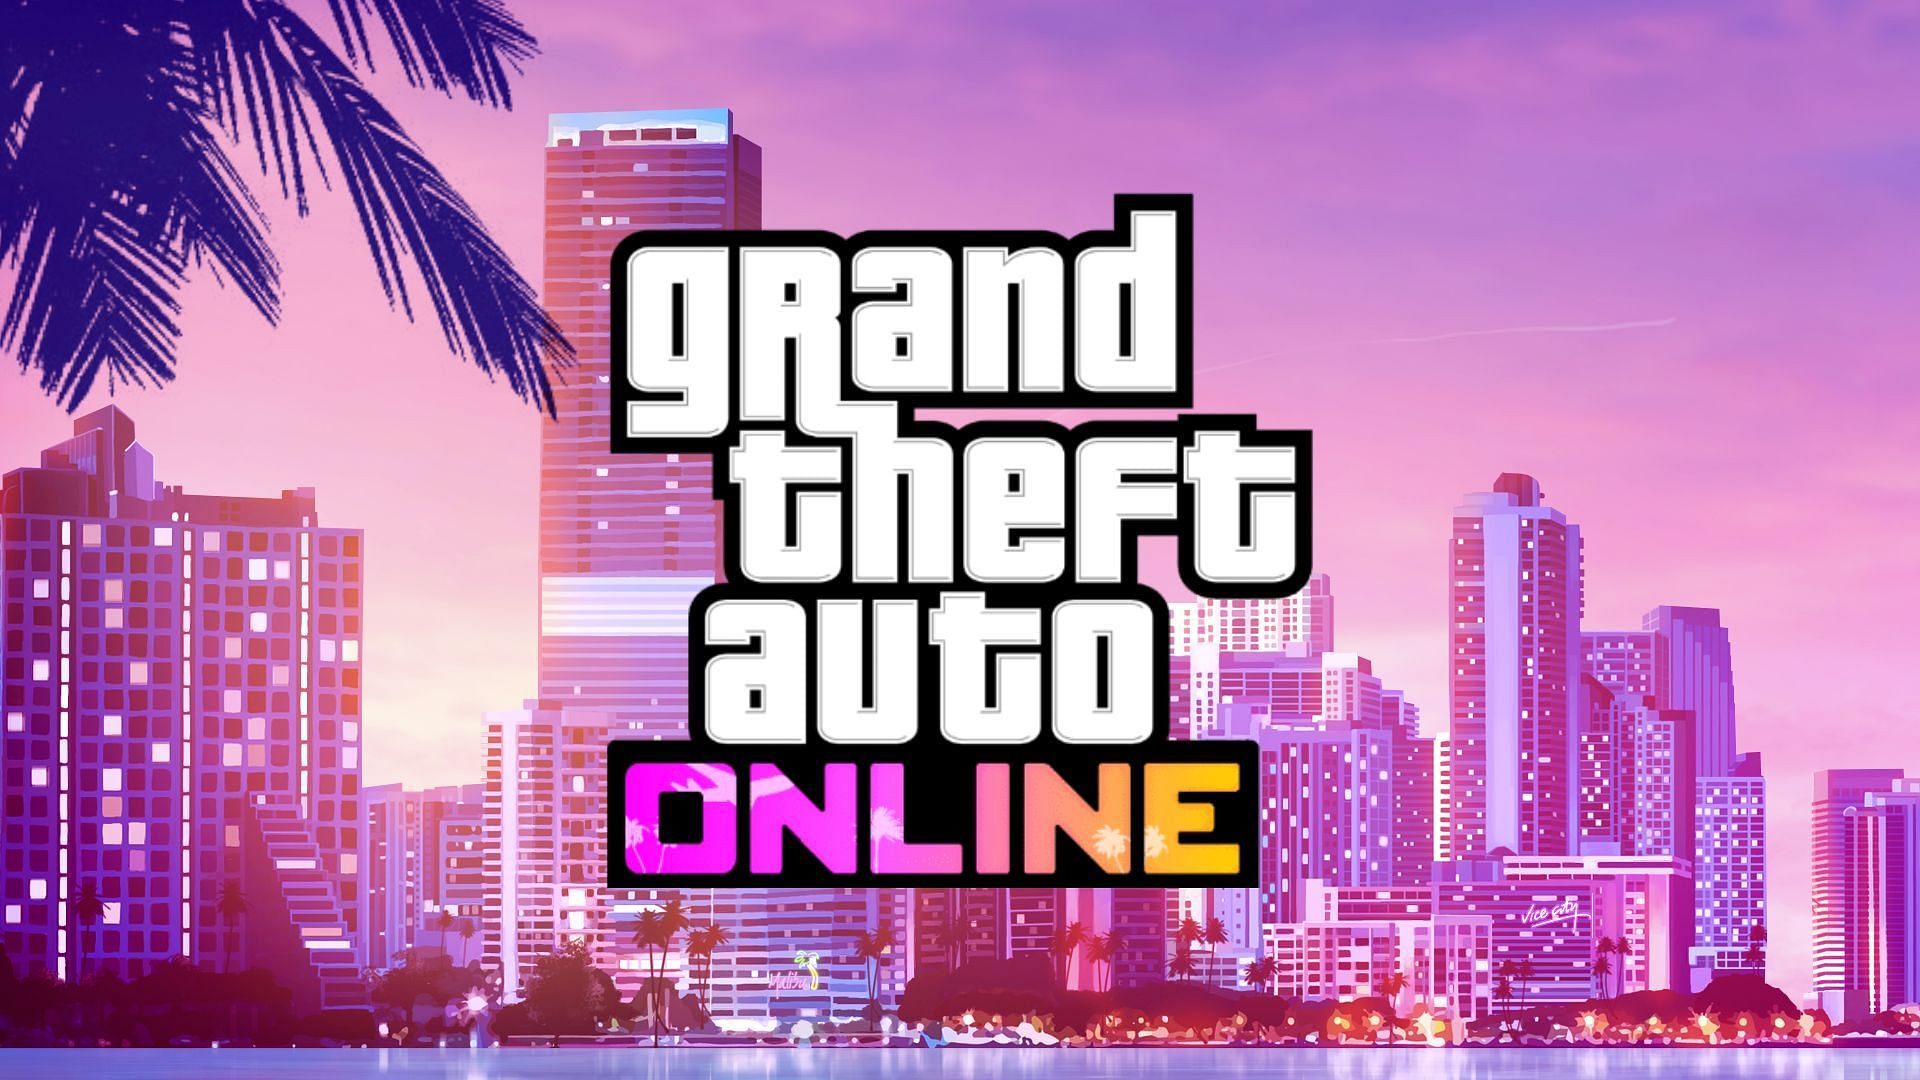 Vice City is one of the locations in the game (Image via Wallpaper Abyss)